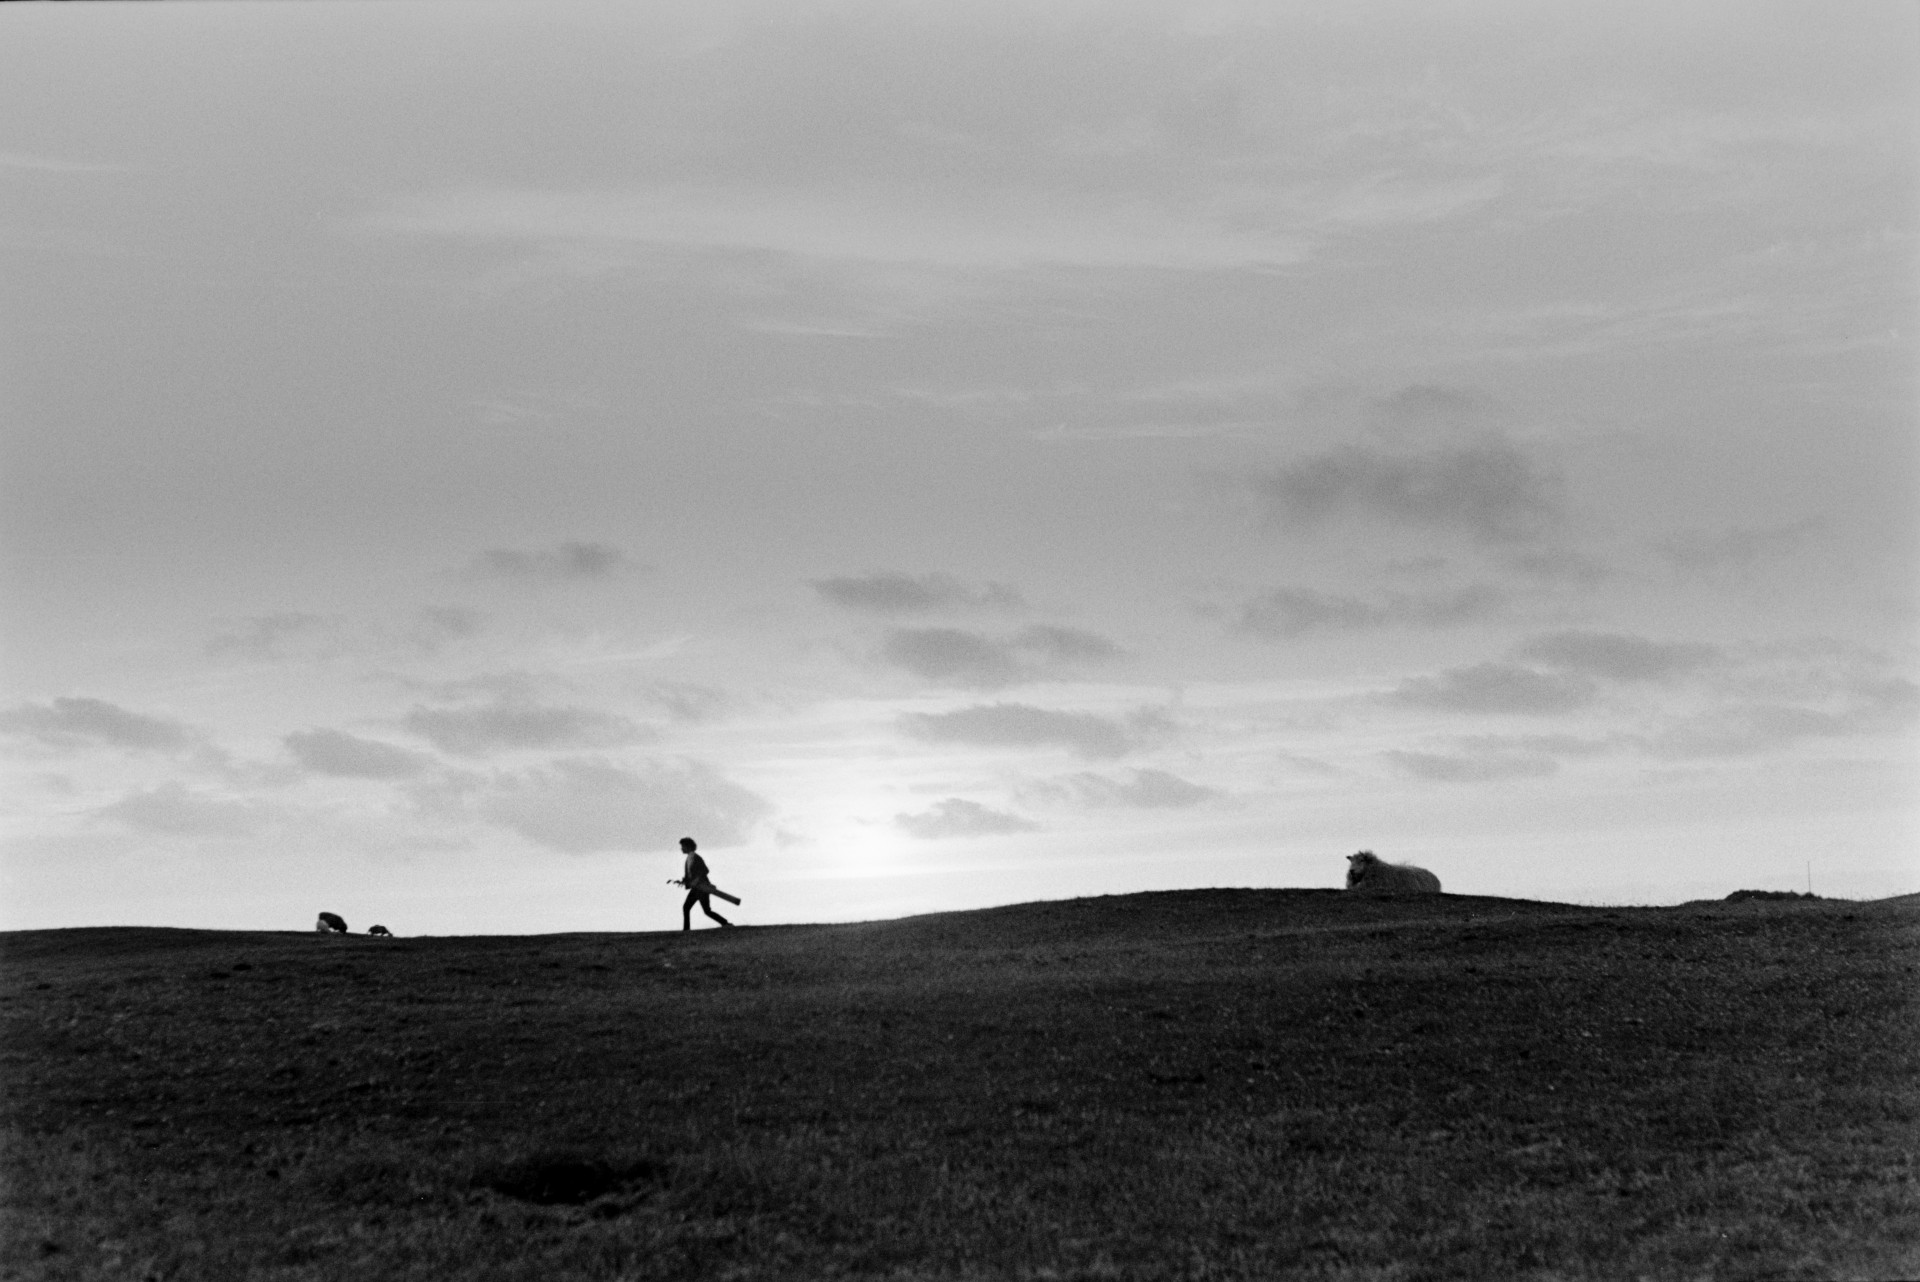 A person and sheep on the golf course at Westward Ho! They are silhouetted on the horizon.